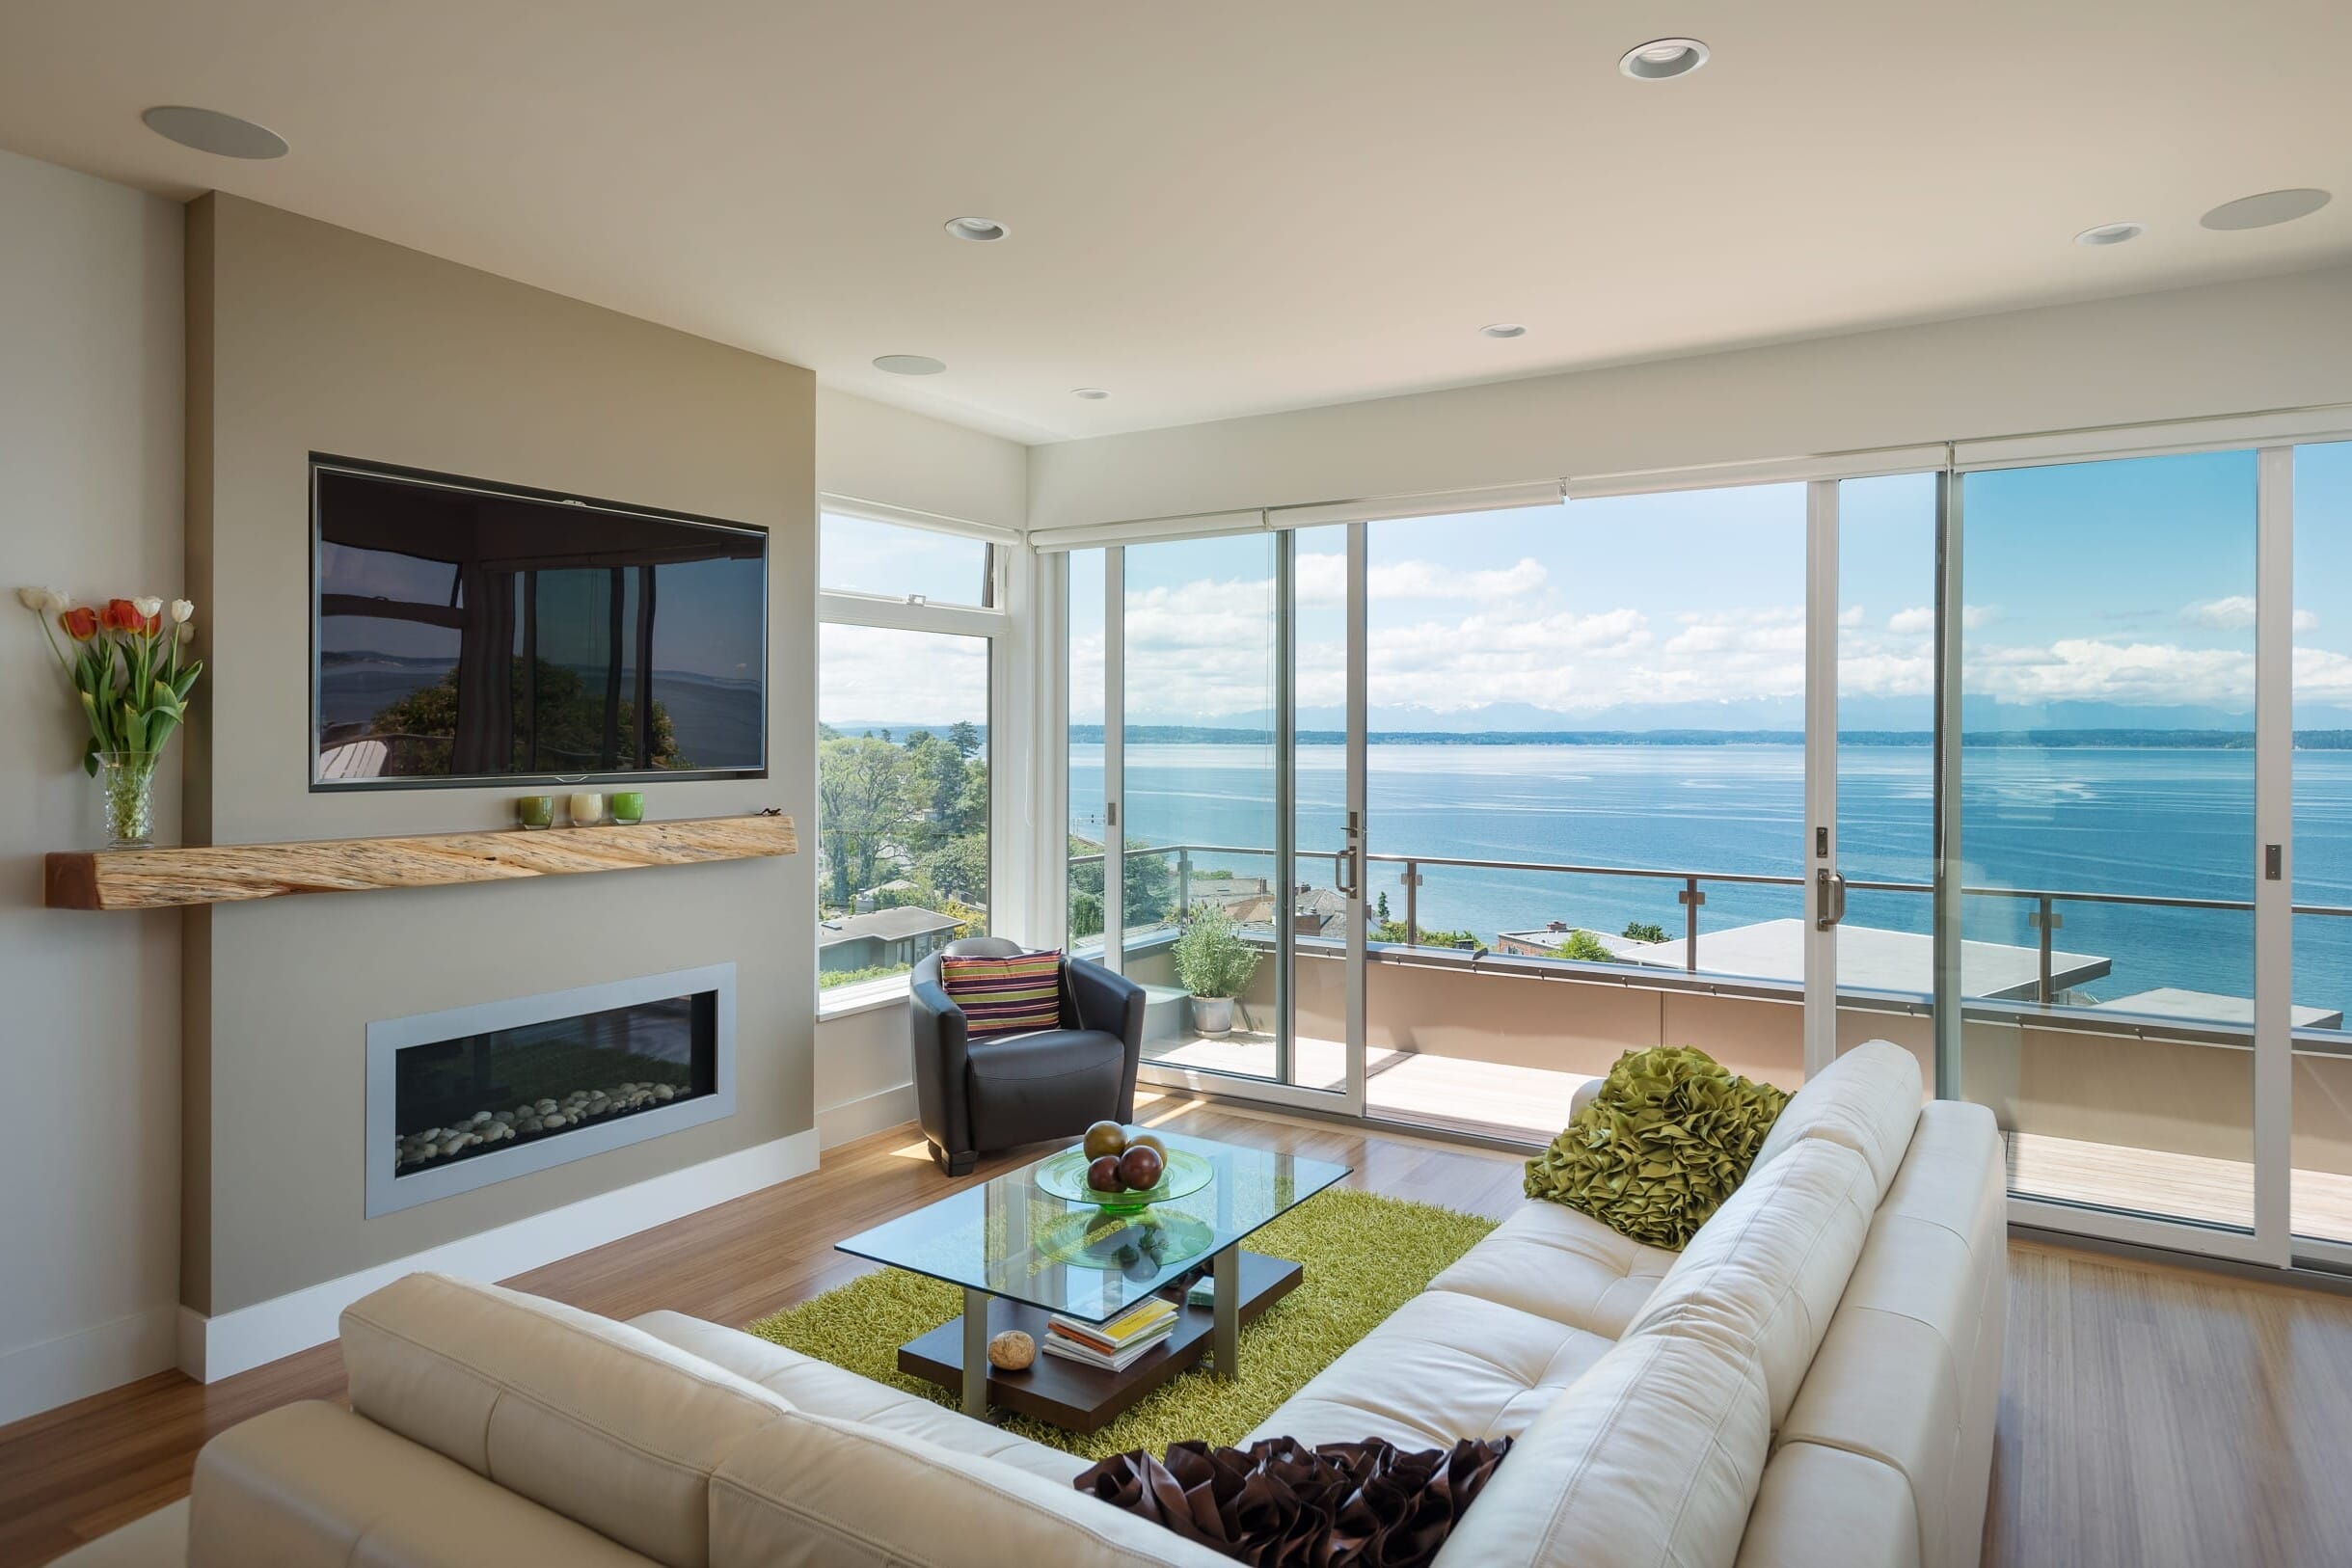 A living room with a large glass door overlooking the water.